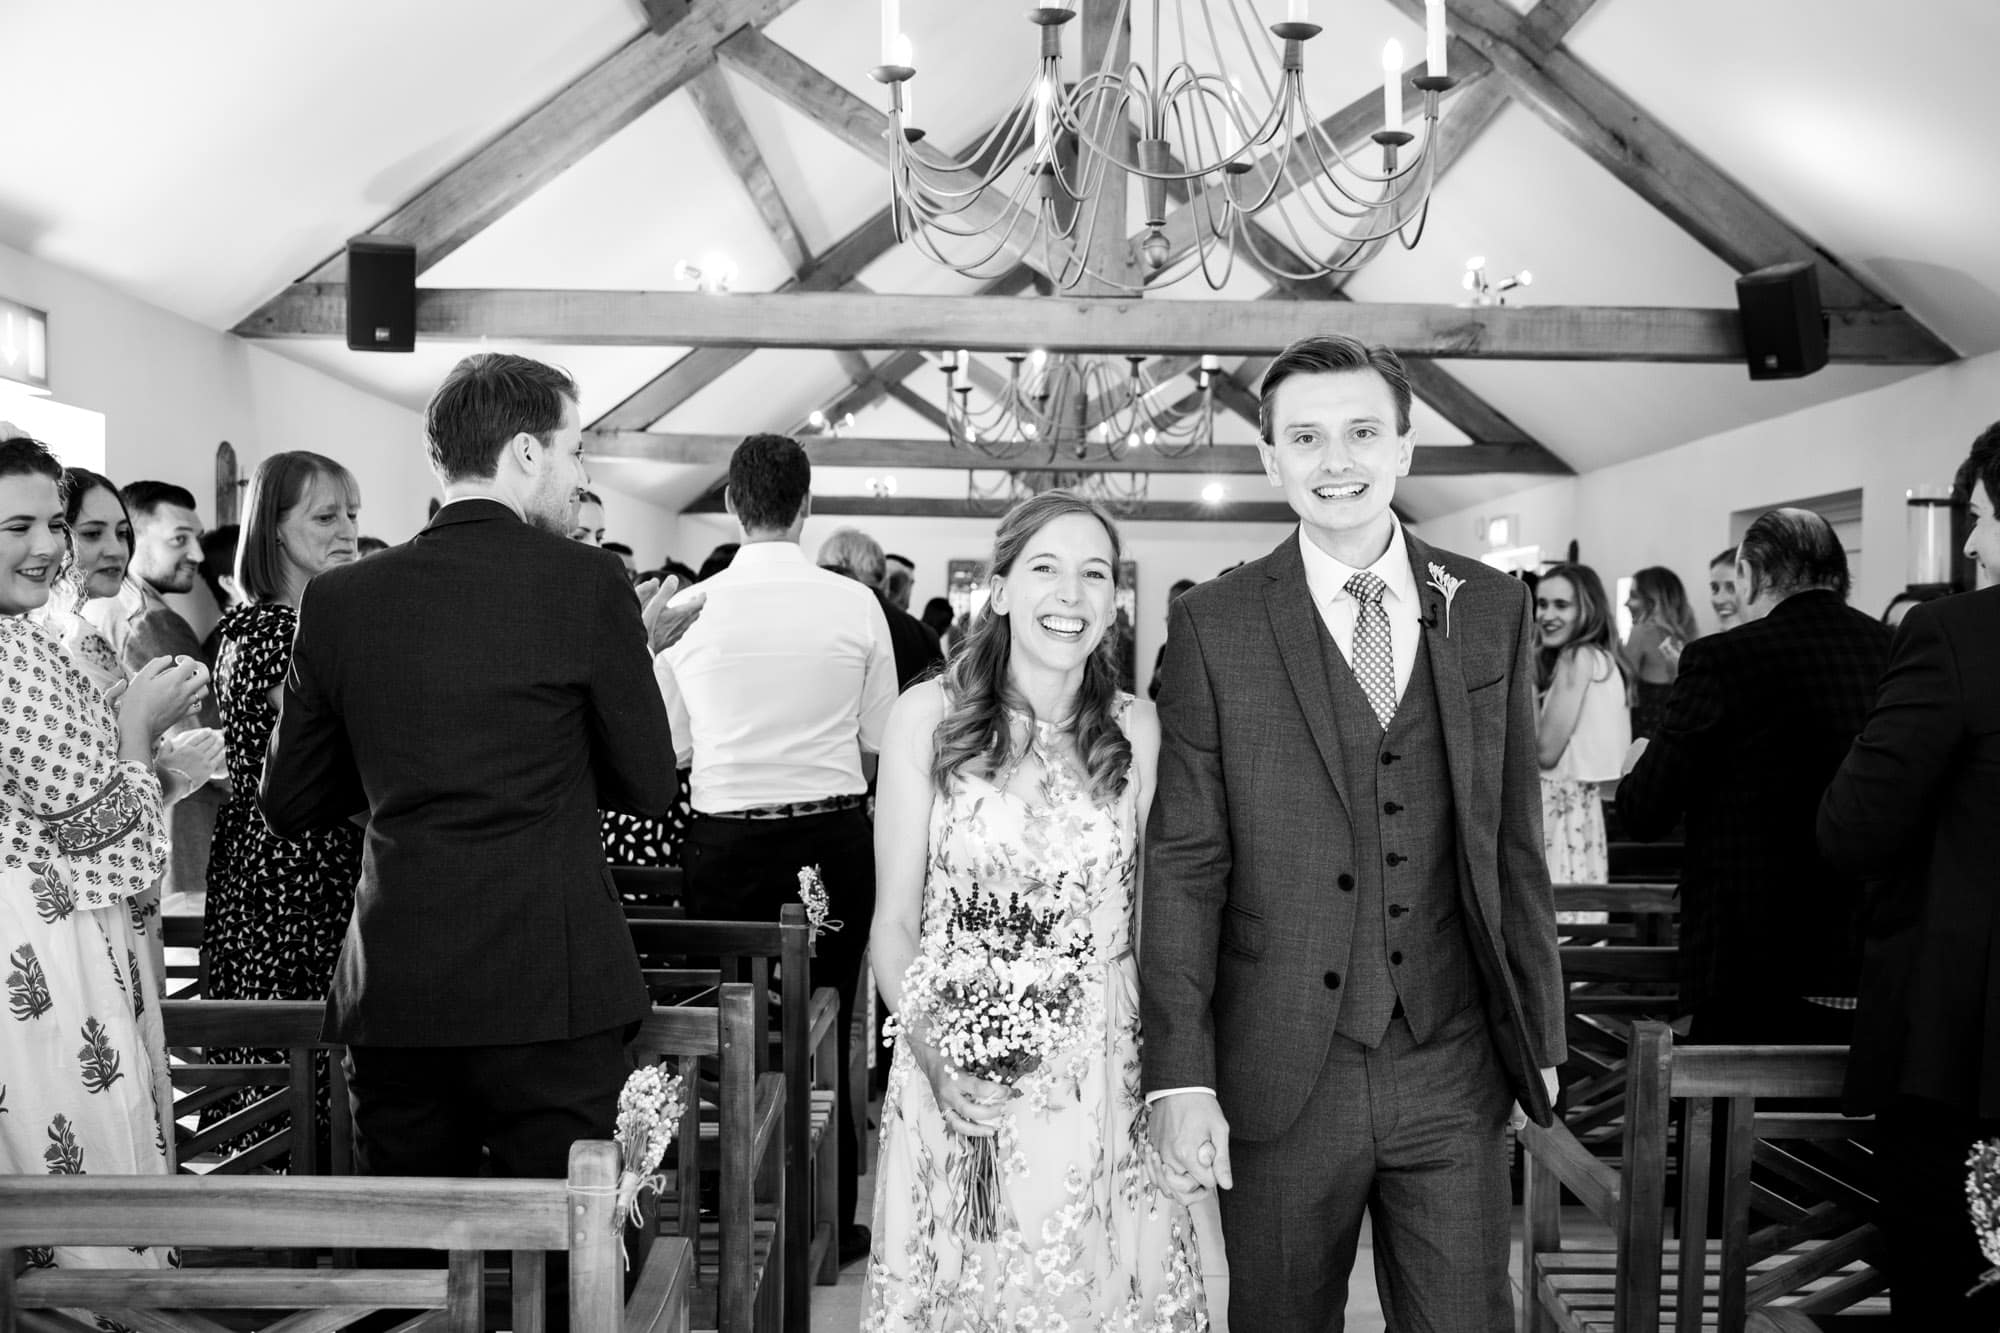 Newly married couple holding hands and walking out from ceremony wedding at Oaks Farm Weddings venue in Bromley wedding photography image